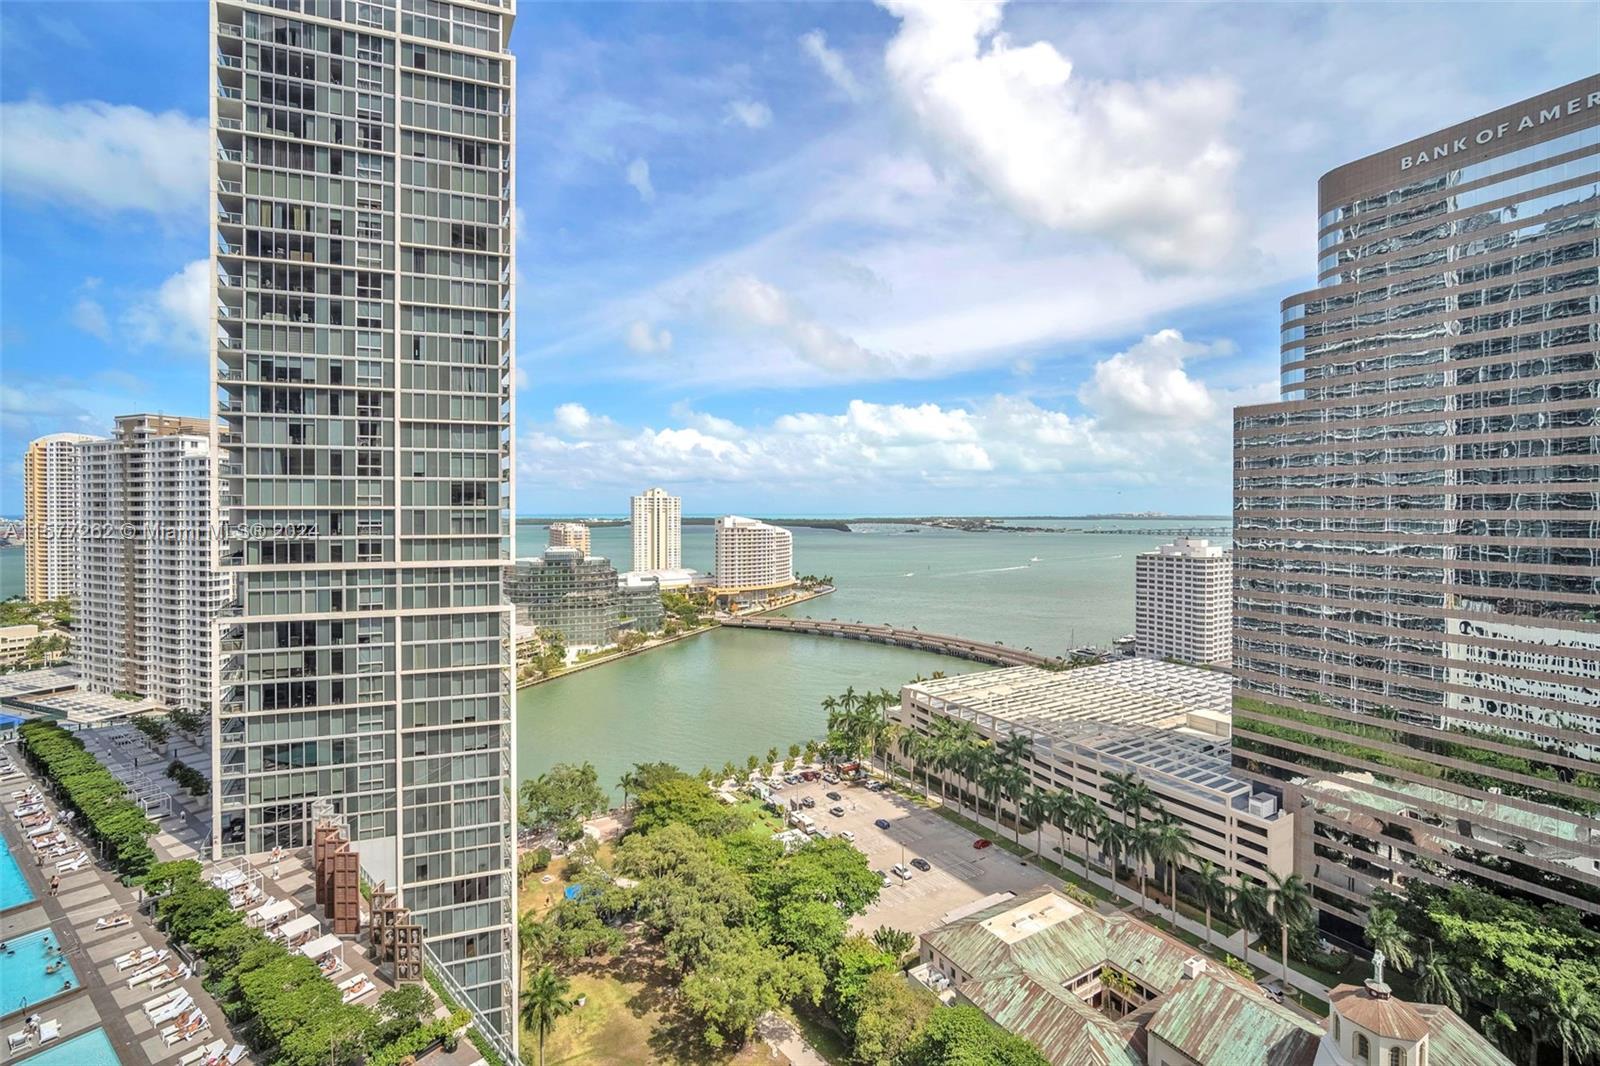 Luxury condo with 1,459 sqft. located on the 25th floor of the famous  ICON TOWER III  in the heart of the financial district with a spectacular view, close to great restaurants and Brickell City Center mall.  Excellent opportunity for investors as an income in the short term.


Live luxury in the Brickell Style!!!!